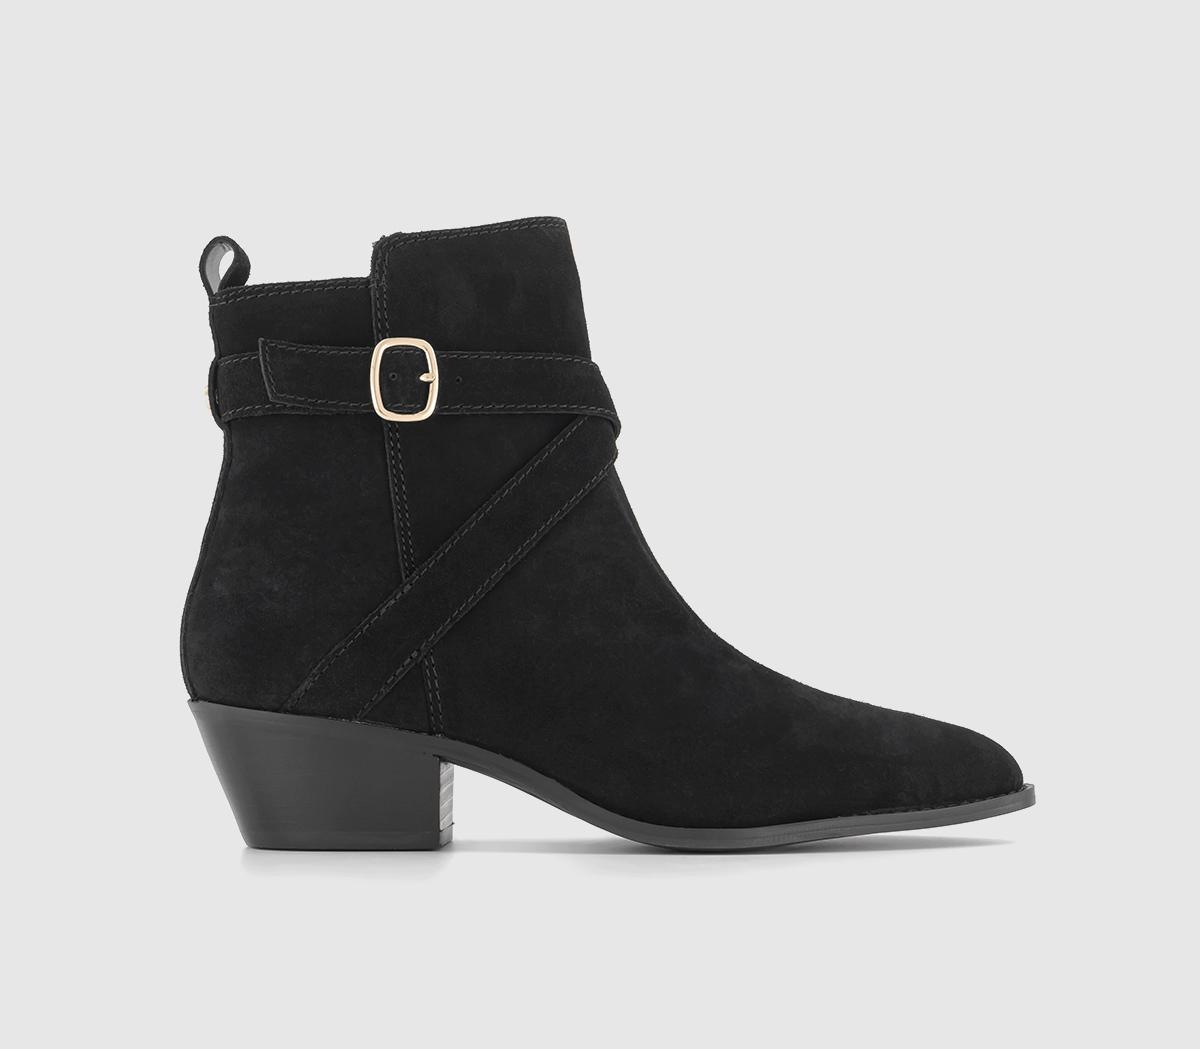 OFFICE Arcade Strap Detail Pointed Toe Ankle Boots Black Suede - Women ...